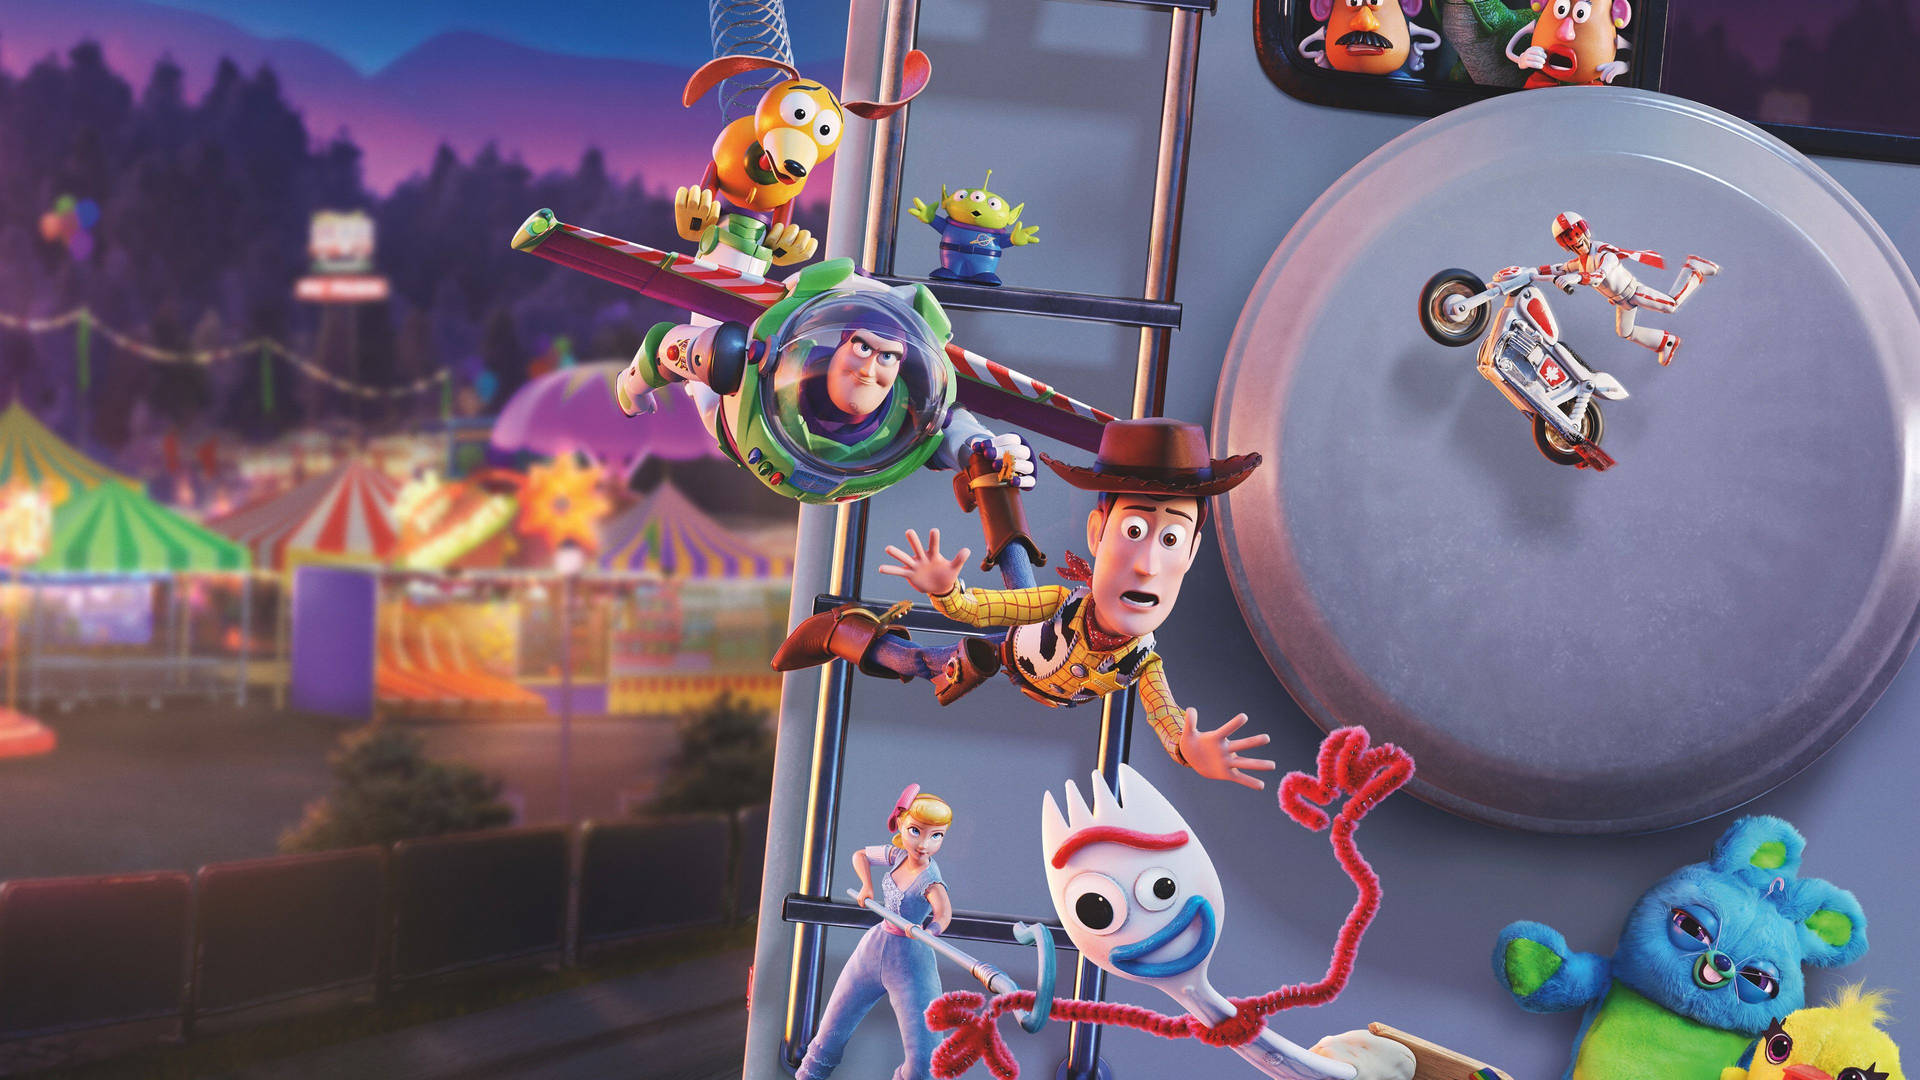 Comical Toy Story 4 Poster Background